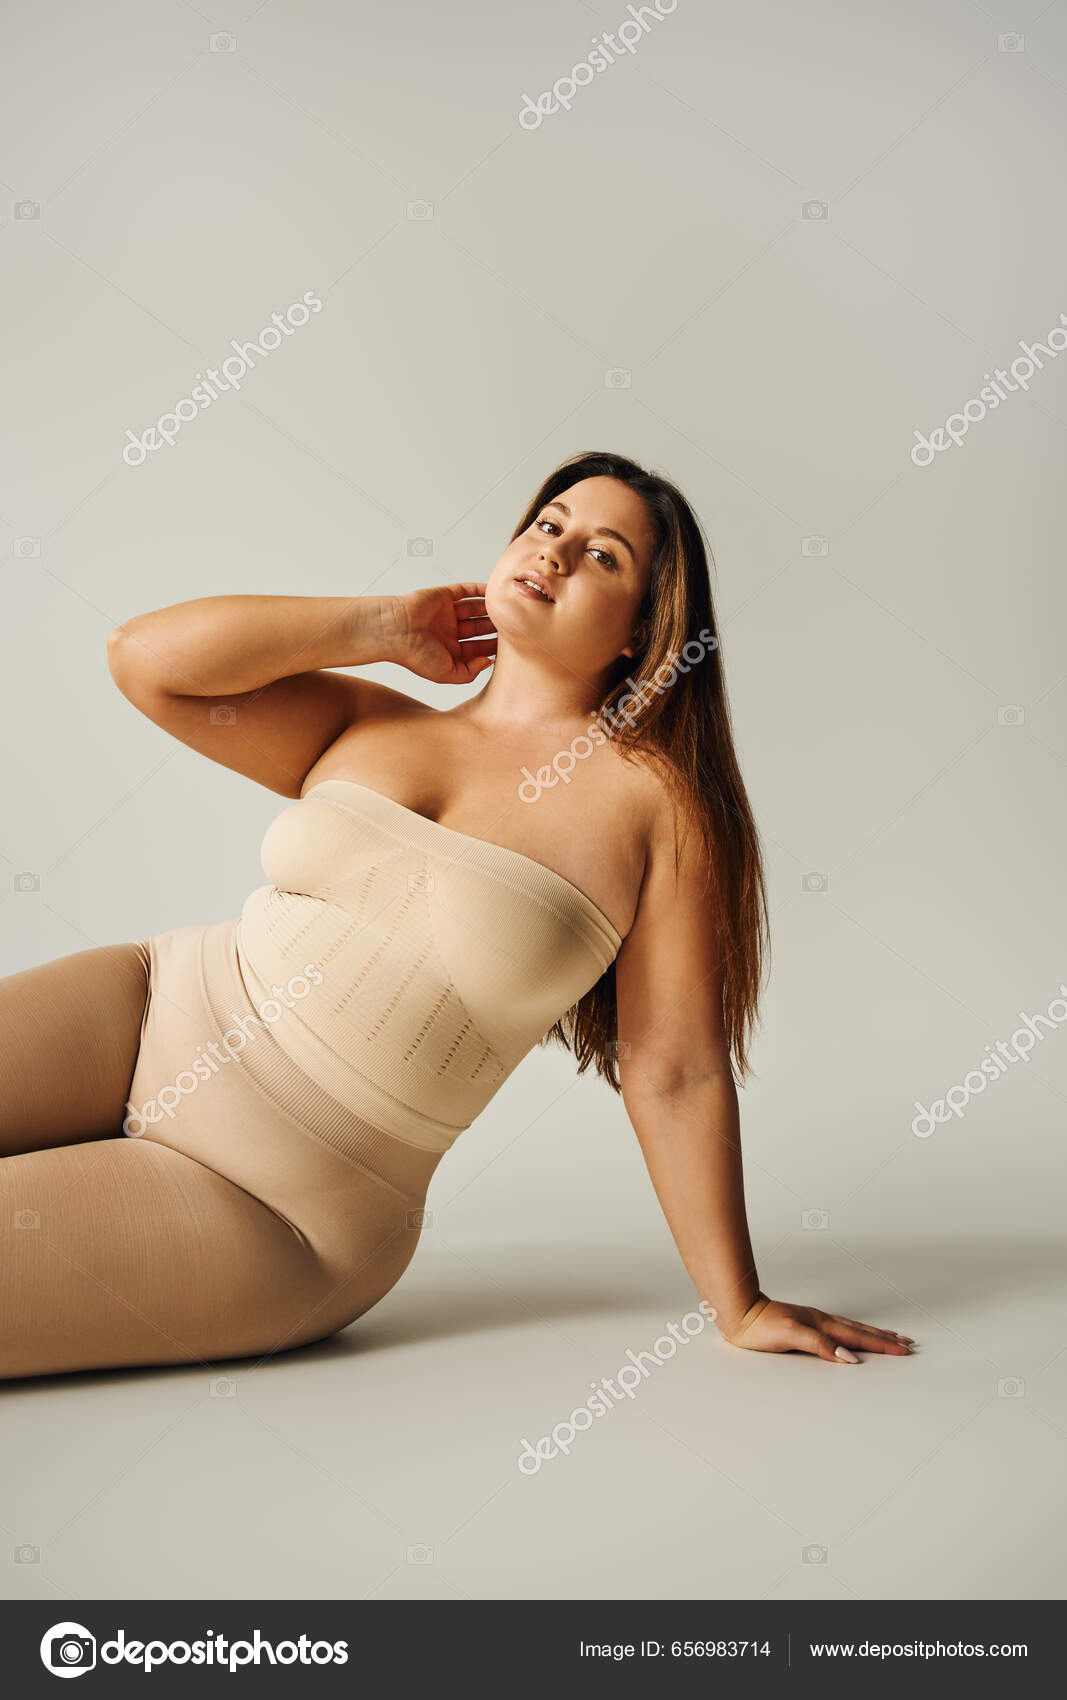 Plus Size Lingerie Archives - She Might Be Loved